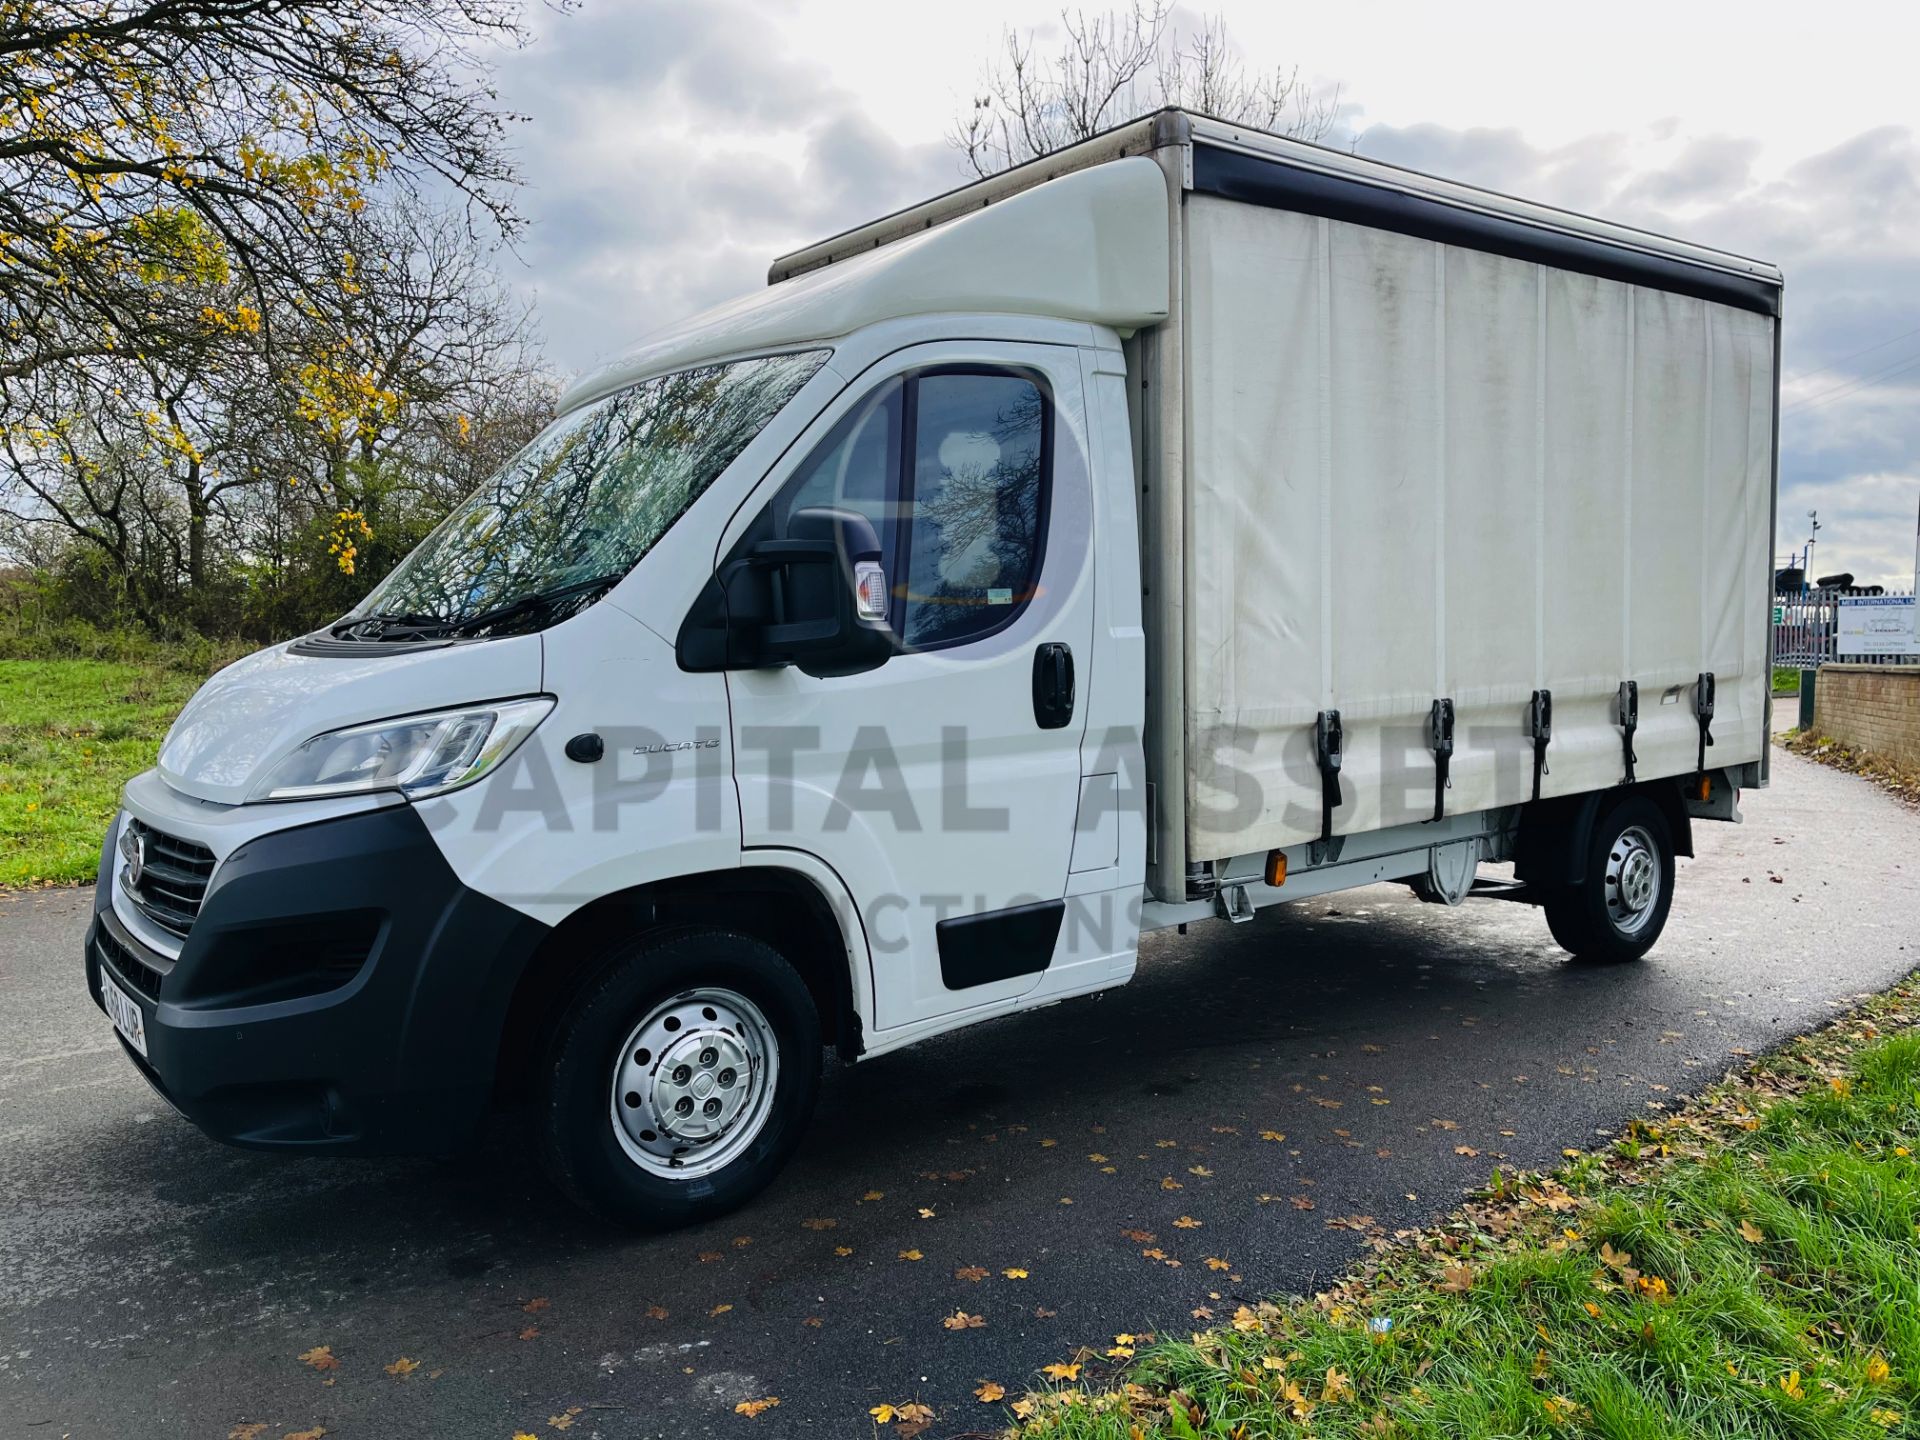 (ON SALE) FIAT DUCATO 2.3 MULTIJET (2019 MODEL) RARE CURTAIN SIDE BODY - 1 OWNER - 360 CAMERA VIEW - Image 6 of 24